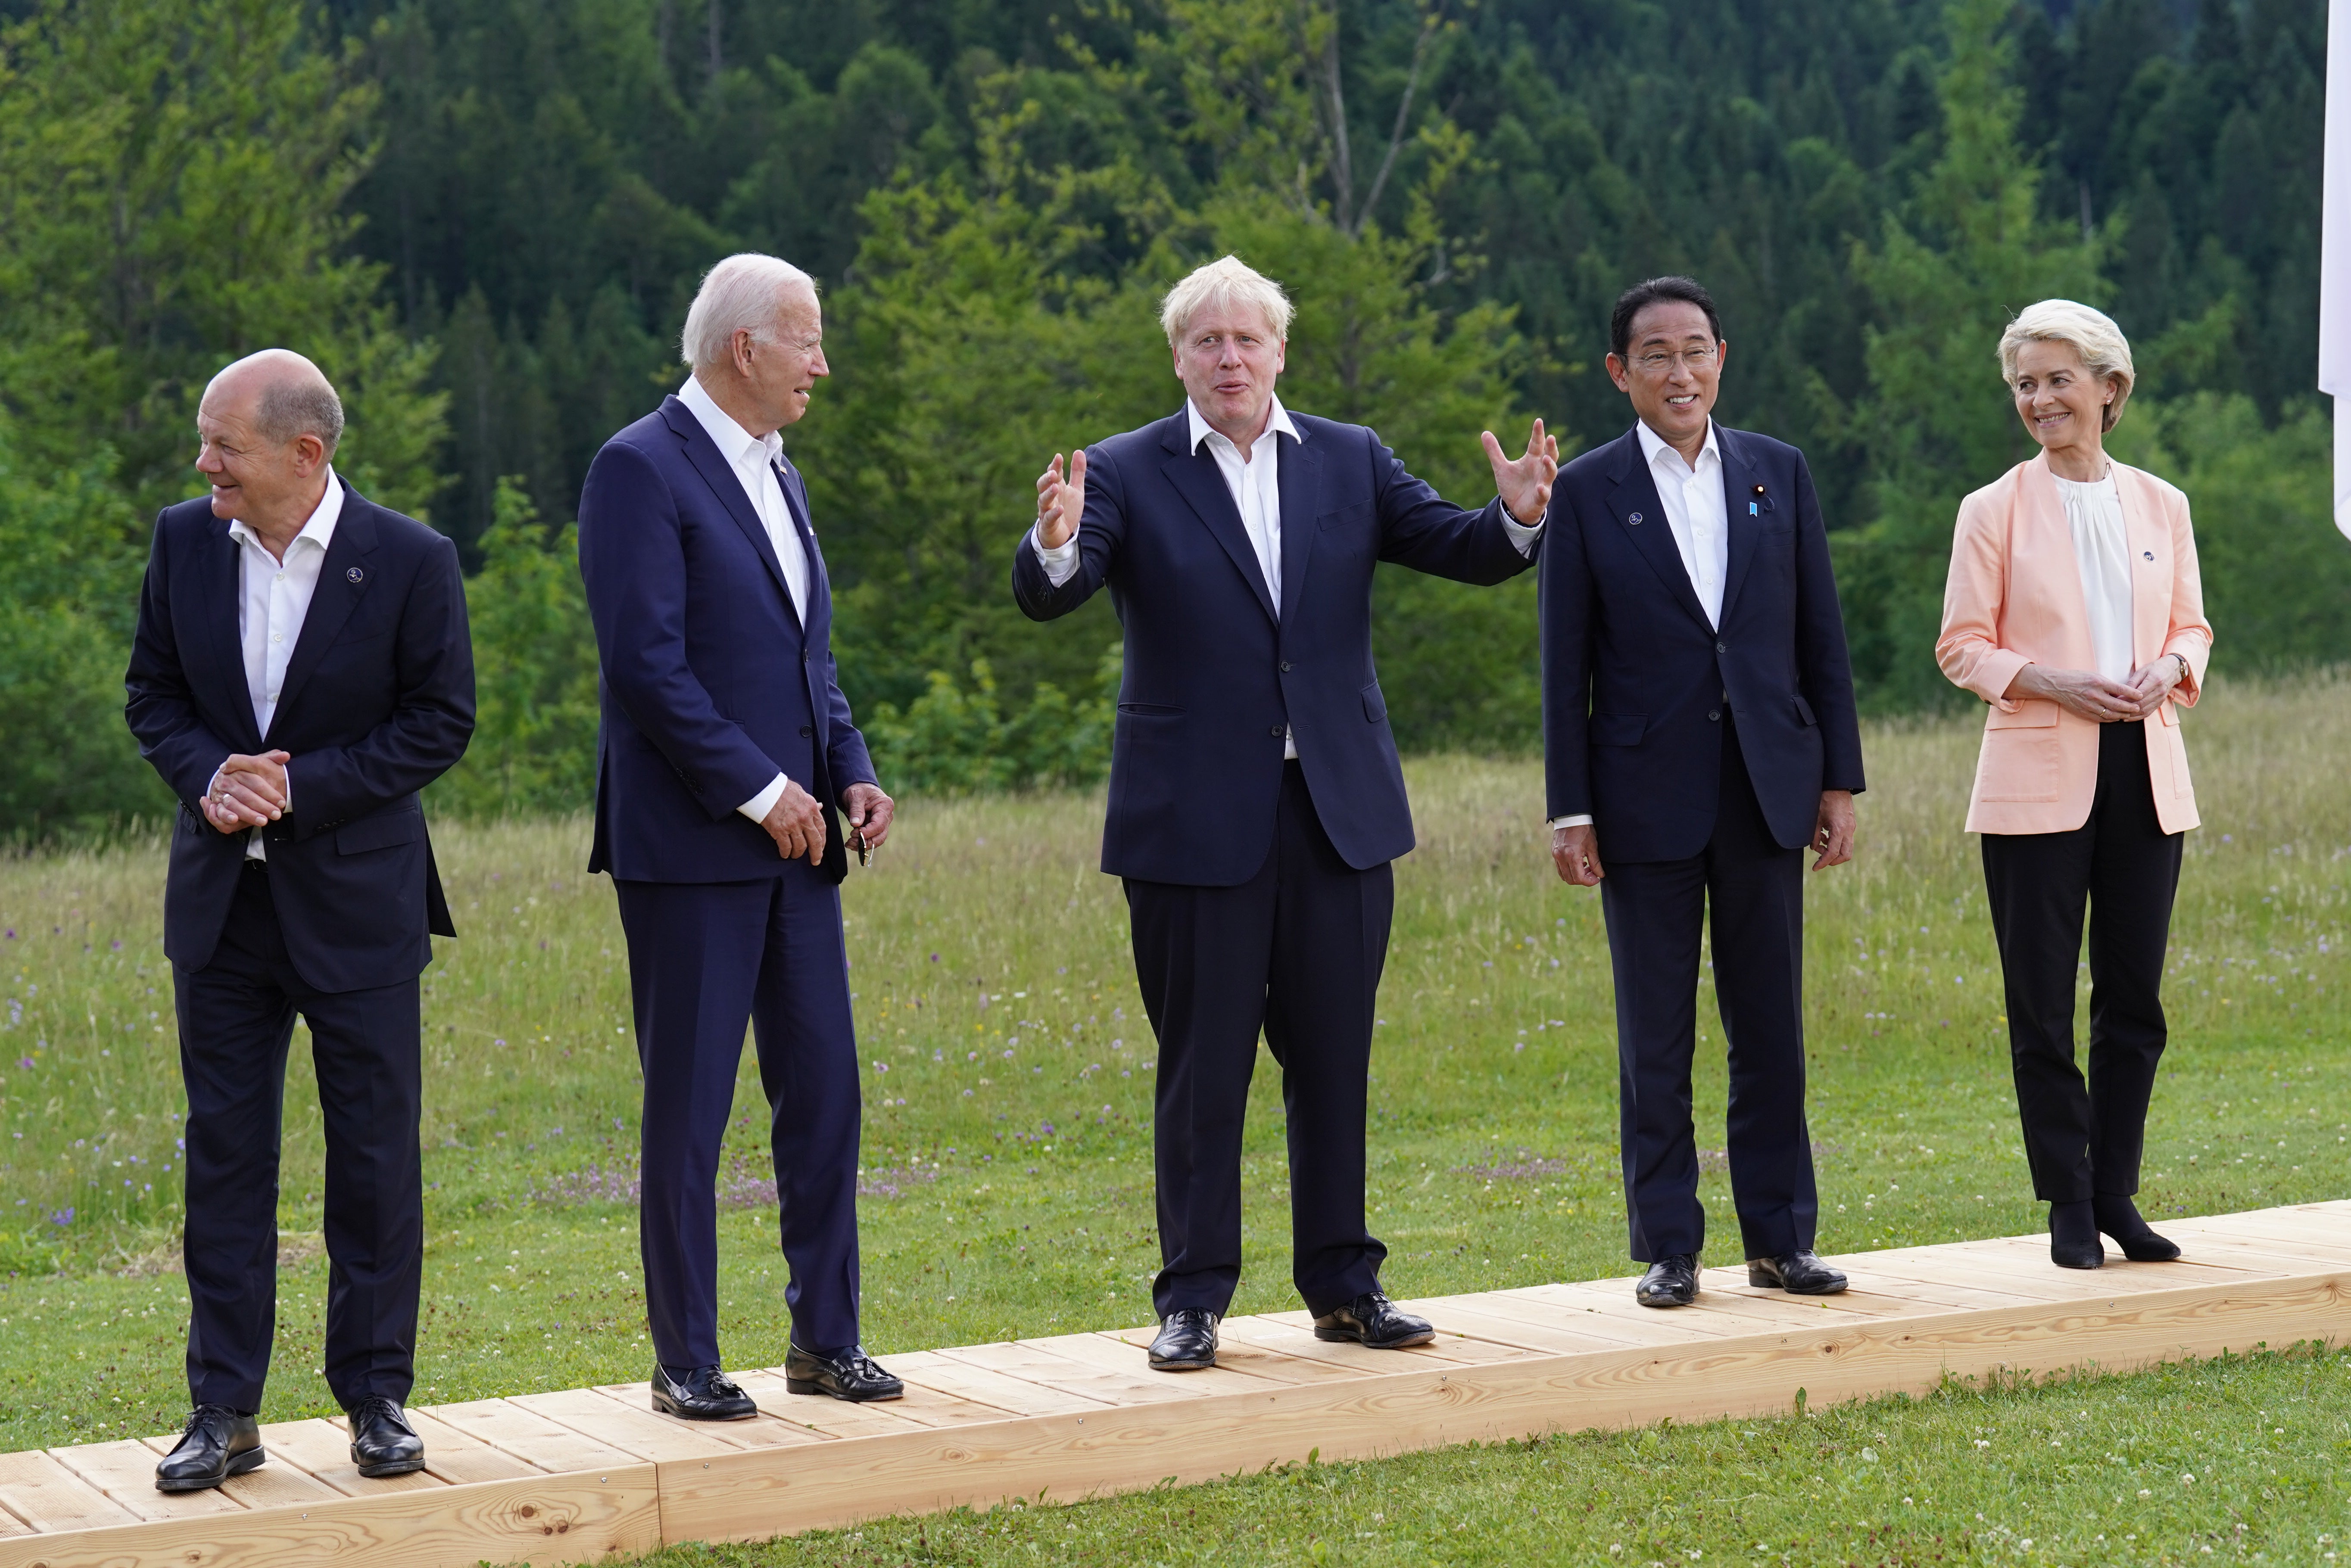 G7 leaders (left to right) German Chancellor Olaf Scholz, US President Joe Biden, Prime Minister Boris Johnson, Prime Minister of Japan Fumio Kishida, and European Union Commission President Ursula von der Leyen posing for the family photo during the G7 summit in Schloss Elmau, in the Bavarian Alps, Germany. Picture date: Sunday June 26, 2022 (Stefan Rousseau/PA)